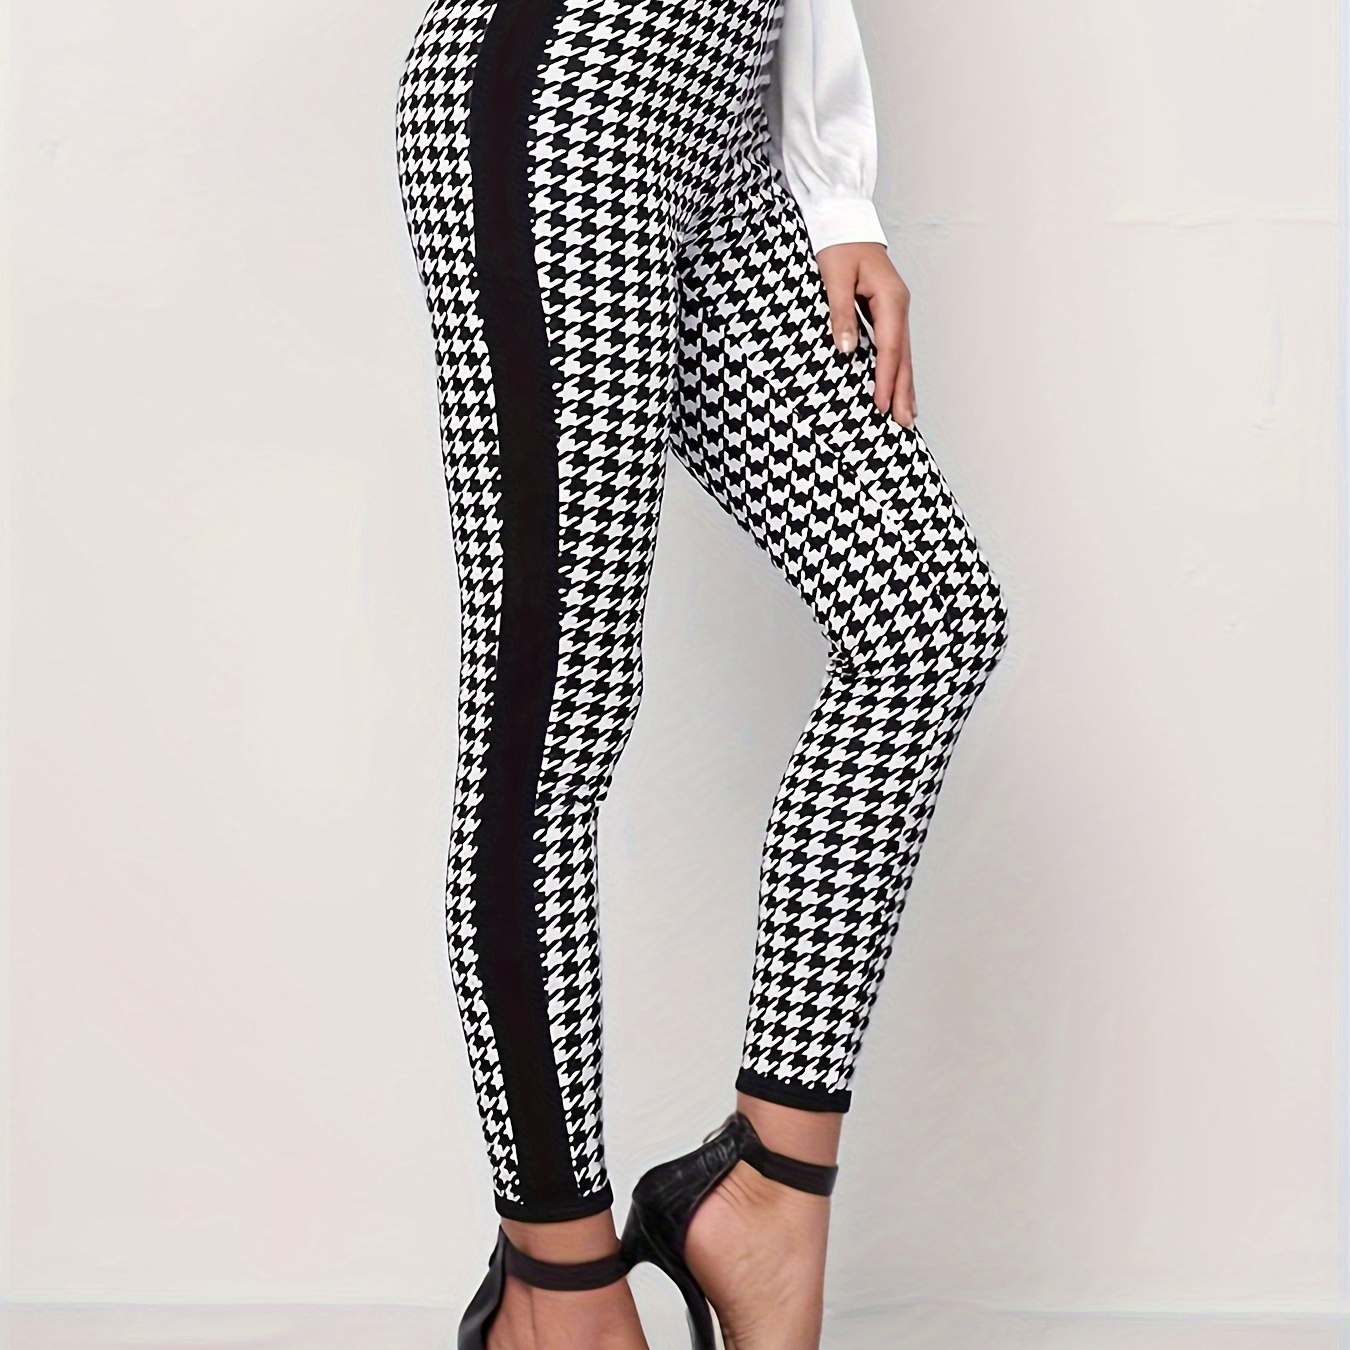 

Houndstooth Print Skinny Pants, Casual High Waist Slim Pants For Spring & Fall, Women's Clothing